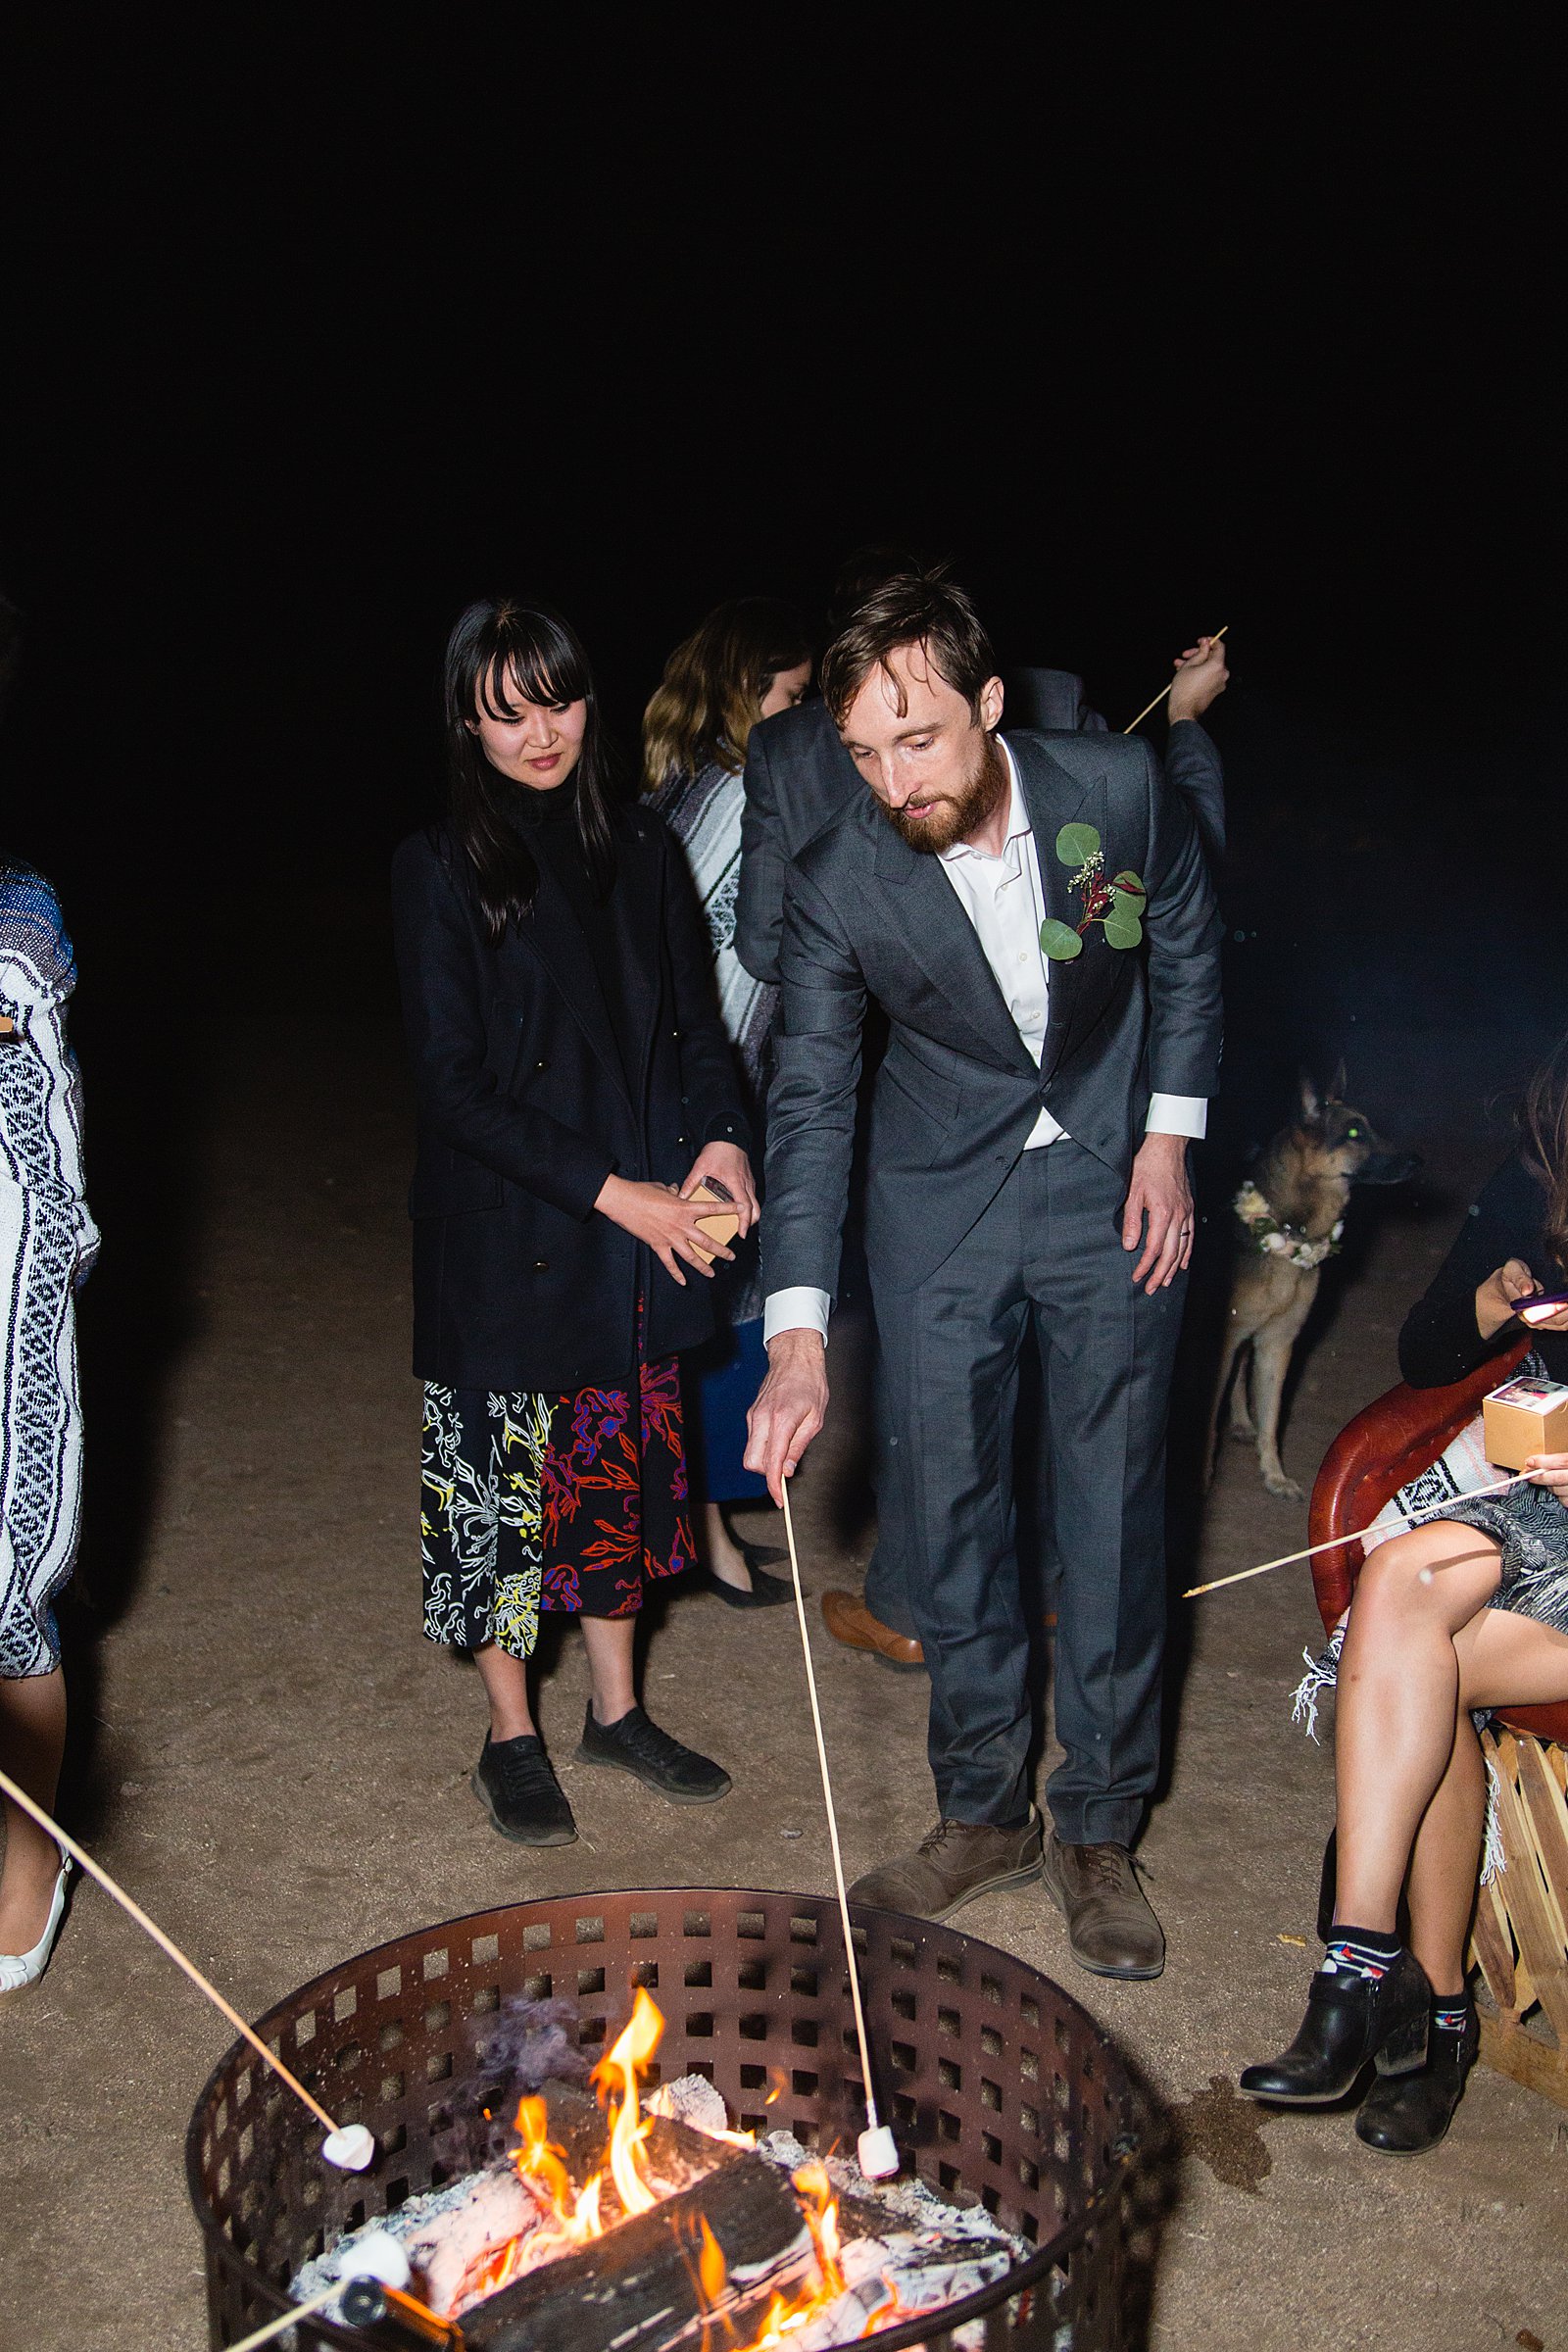 Groom roasting s'mores with guests at a Cloth and Flame wedding reception by Phoenix wedding photographer PMA Photography.